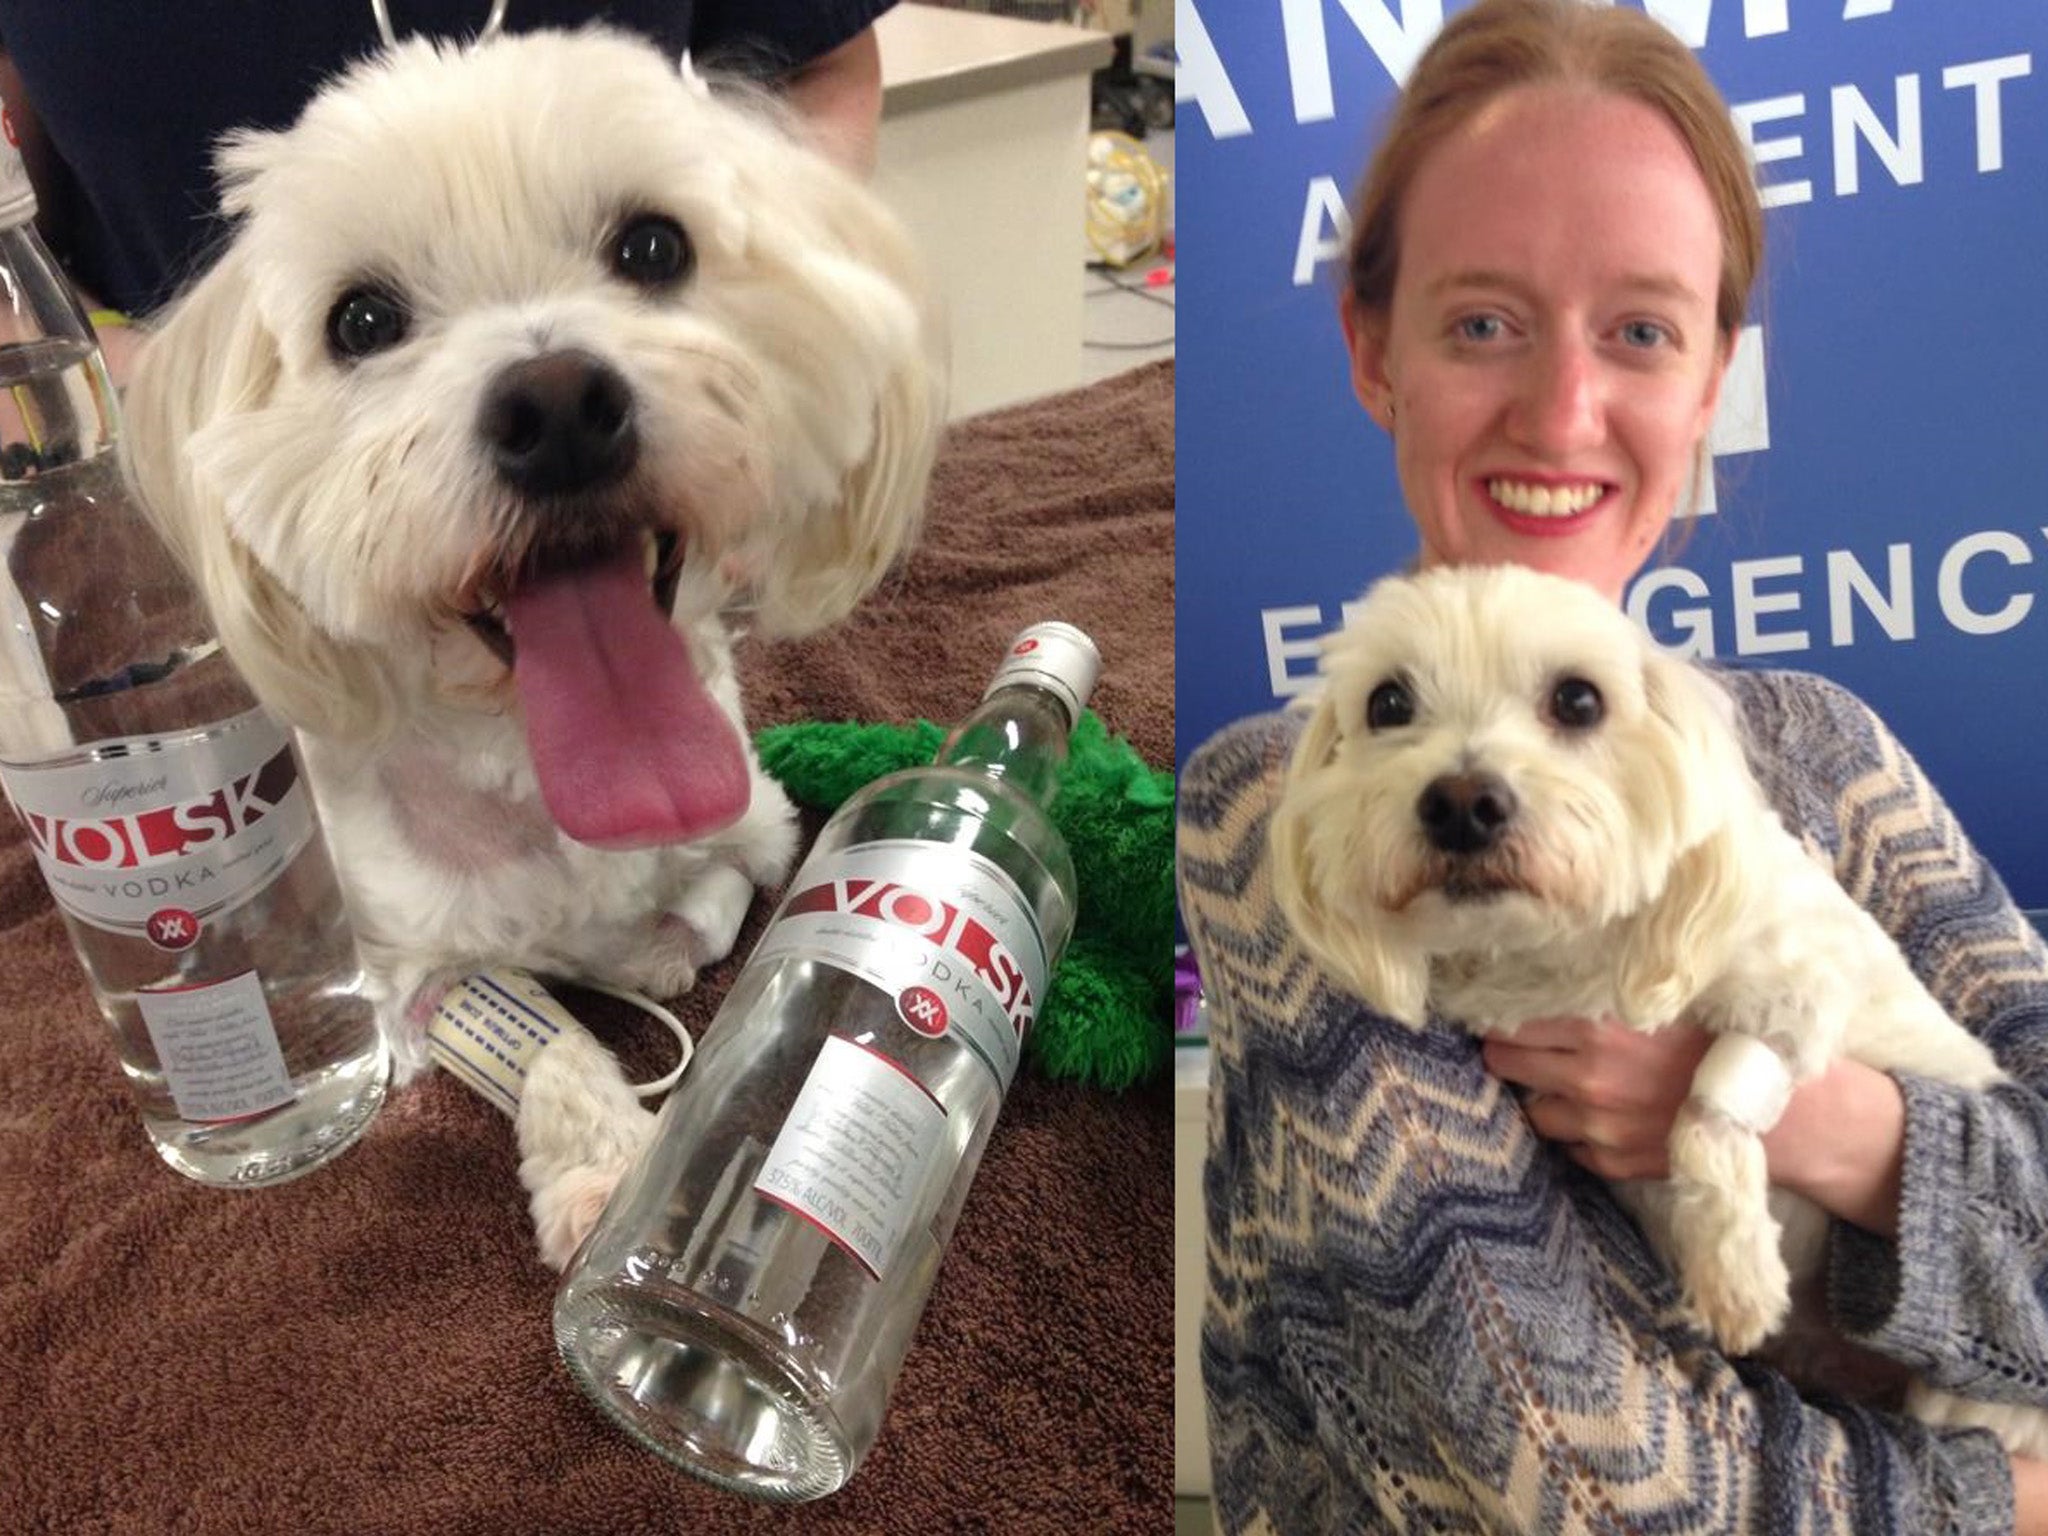 The Maltese terrier was left with a killer hangover following the treatment